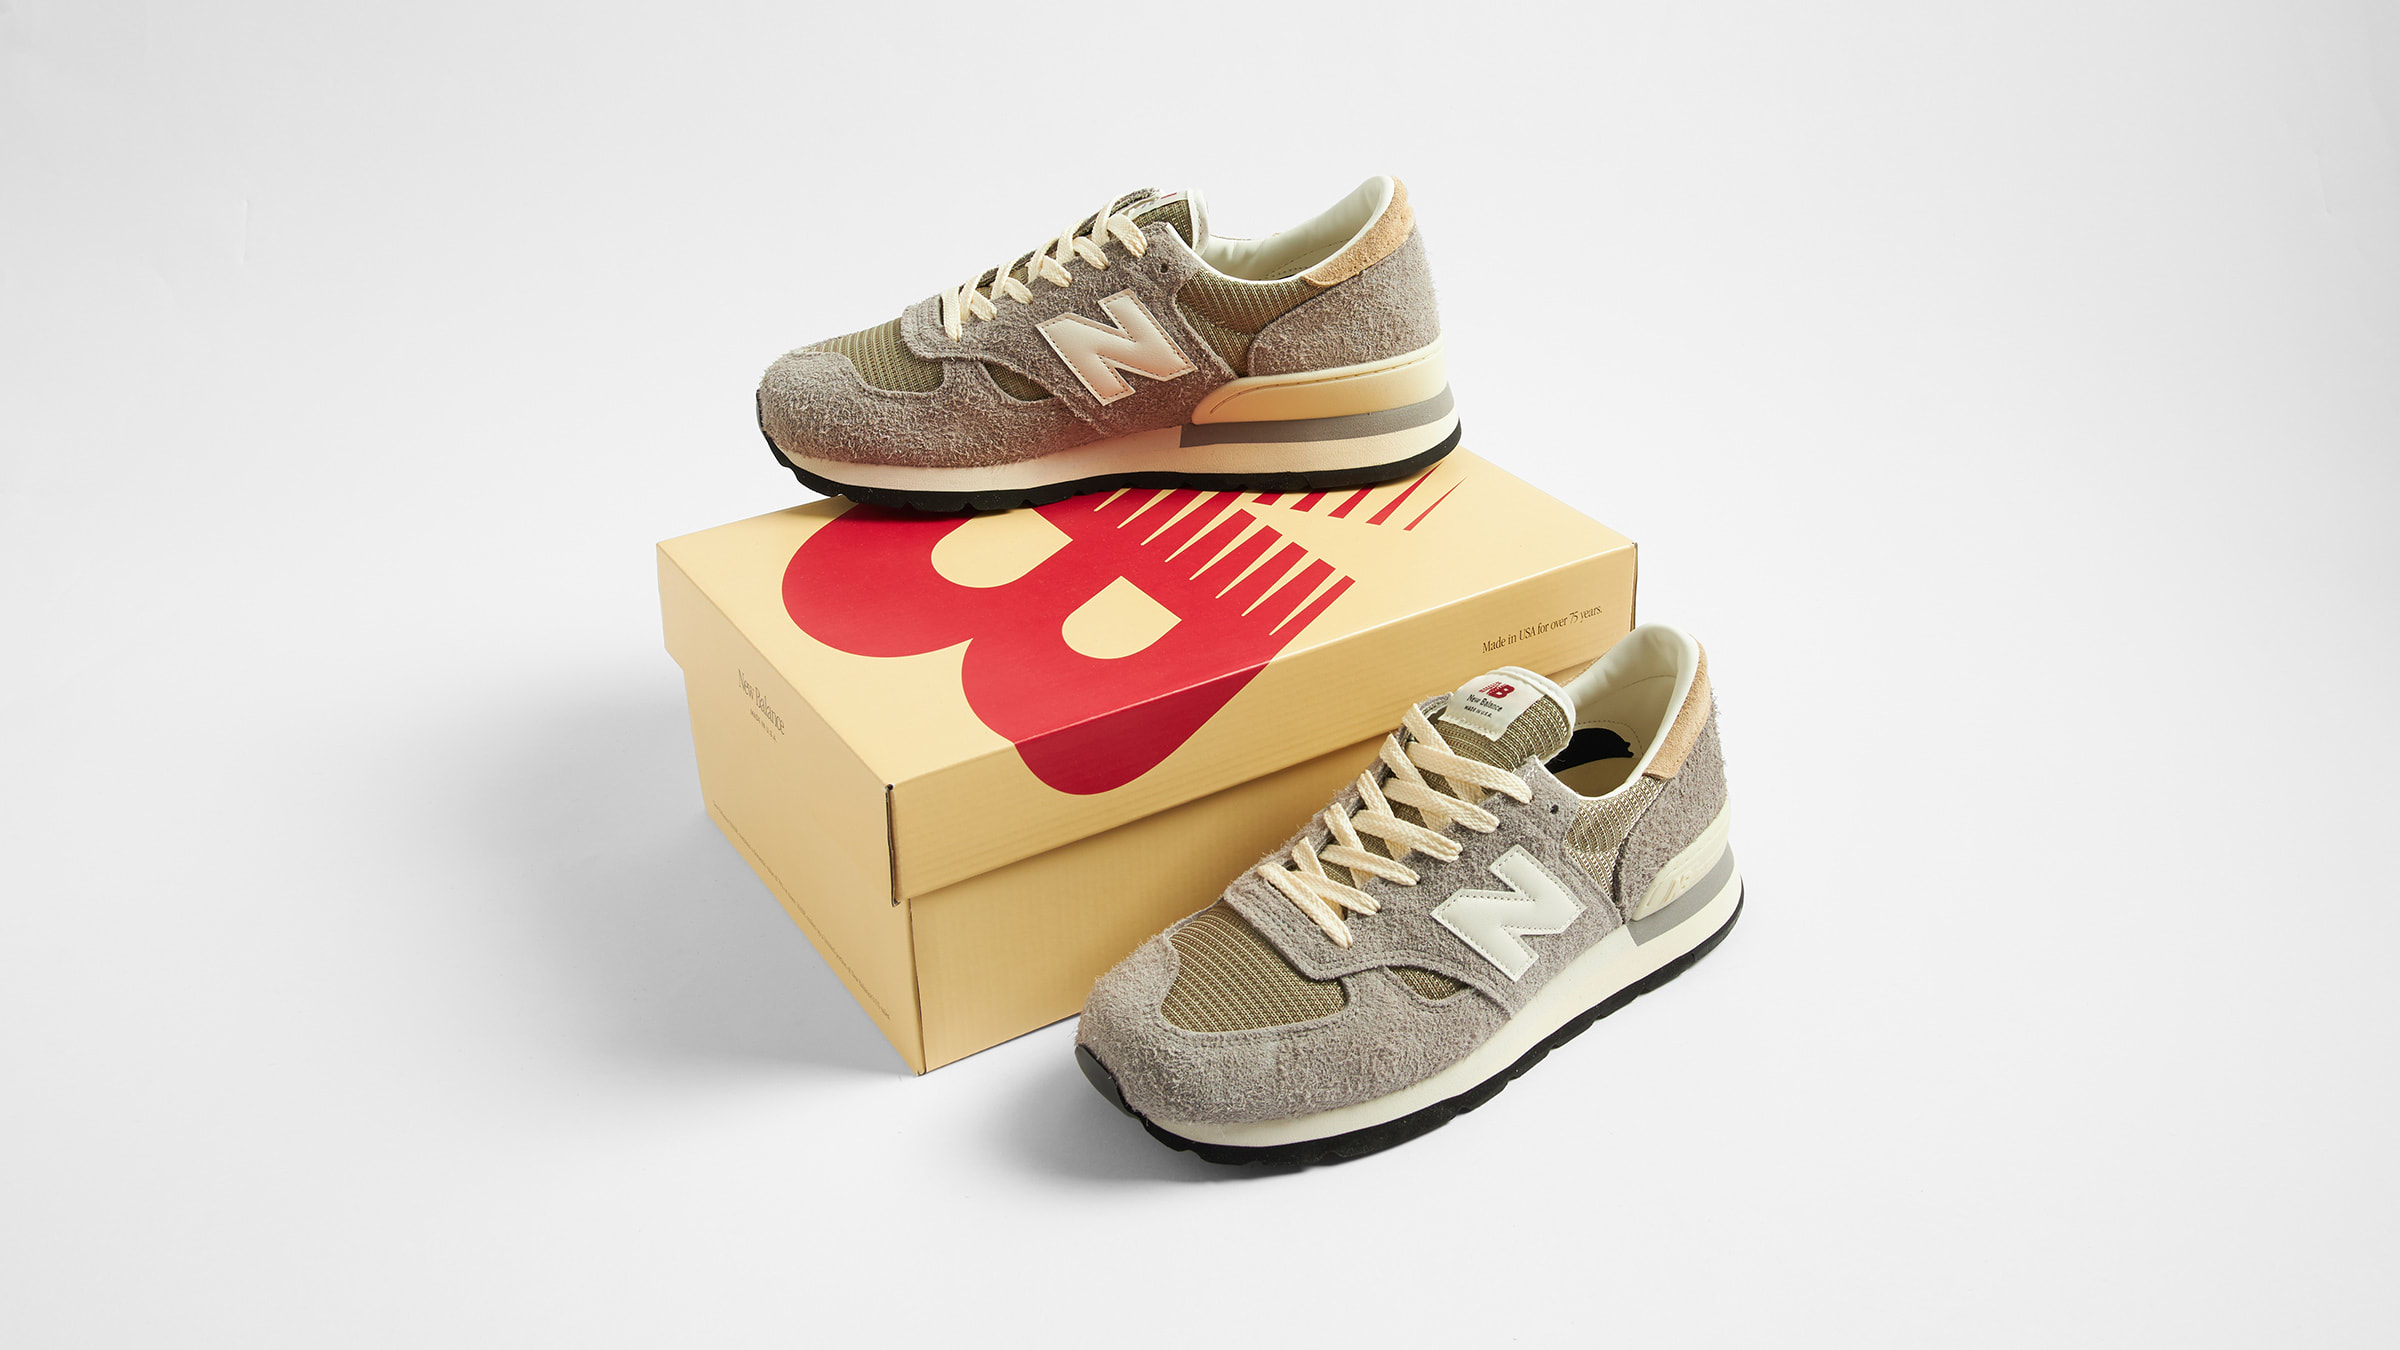 New Balance M990TA1 - Made in USA (Grey & Tan) | END. Launches